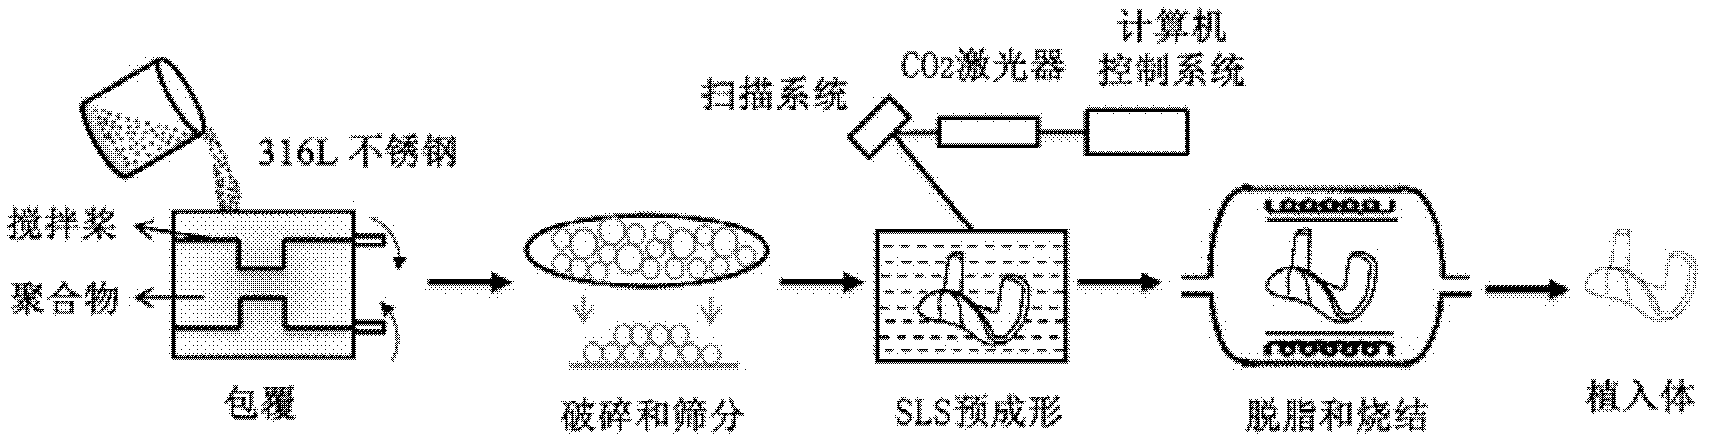 Method for preparing stainless steel biological porous implant material by selective laser sintering